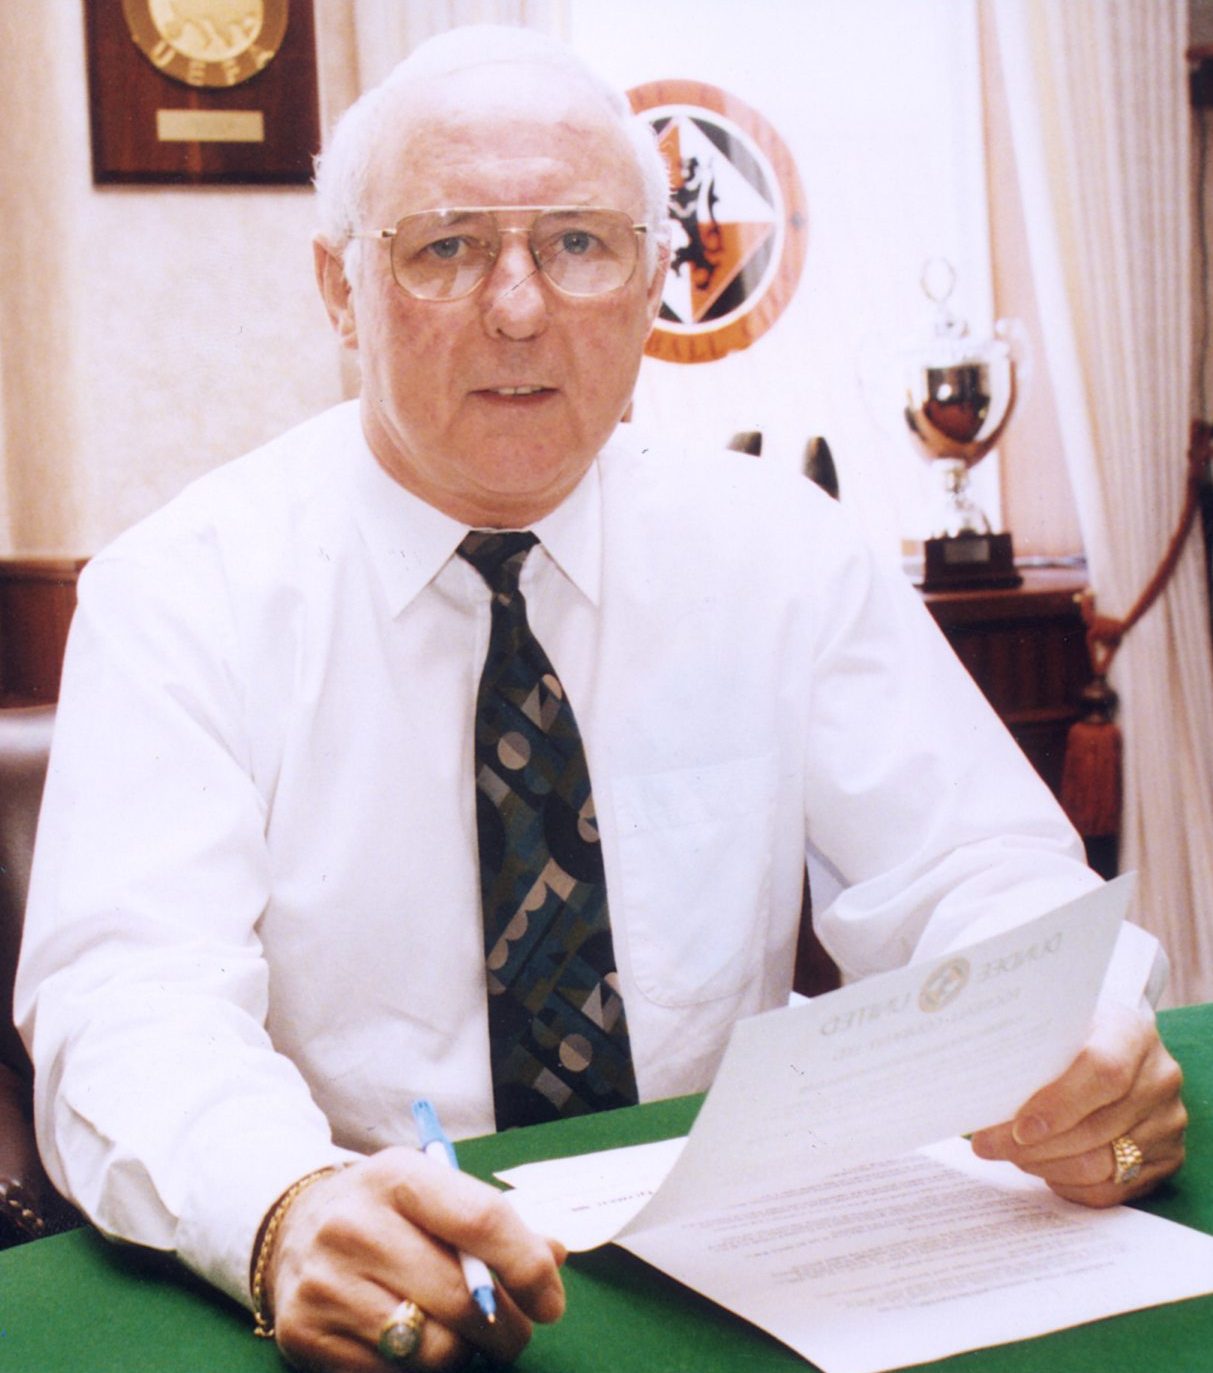 Legendary former Dundee United manager Jim McLean at his desk